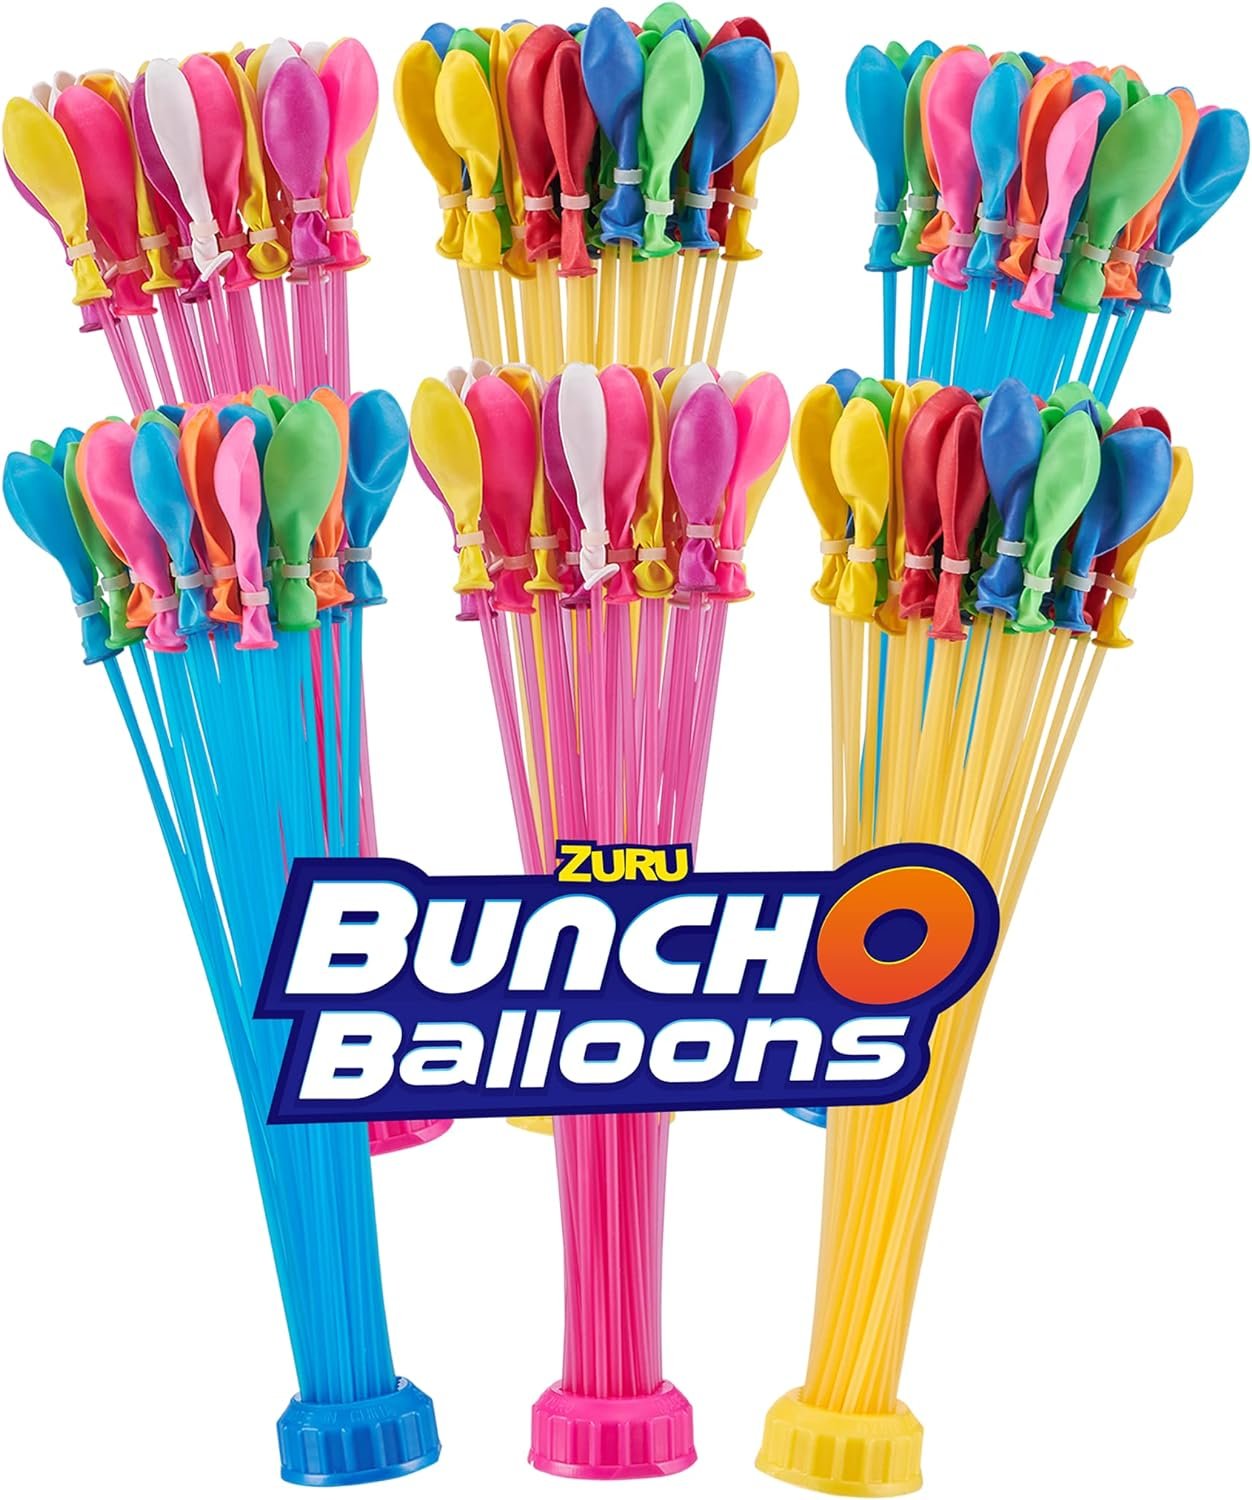 Bunch O Balloons Crazy Color by ZURU, 200+ Rapid-Filling Self-Sealing Water Balloons for Outdoor Family, Friends, Children Summer Fun, Amazon Exclusive (6 Pack)